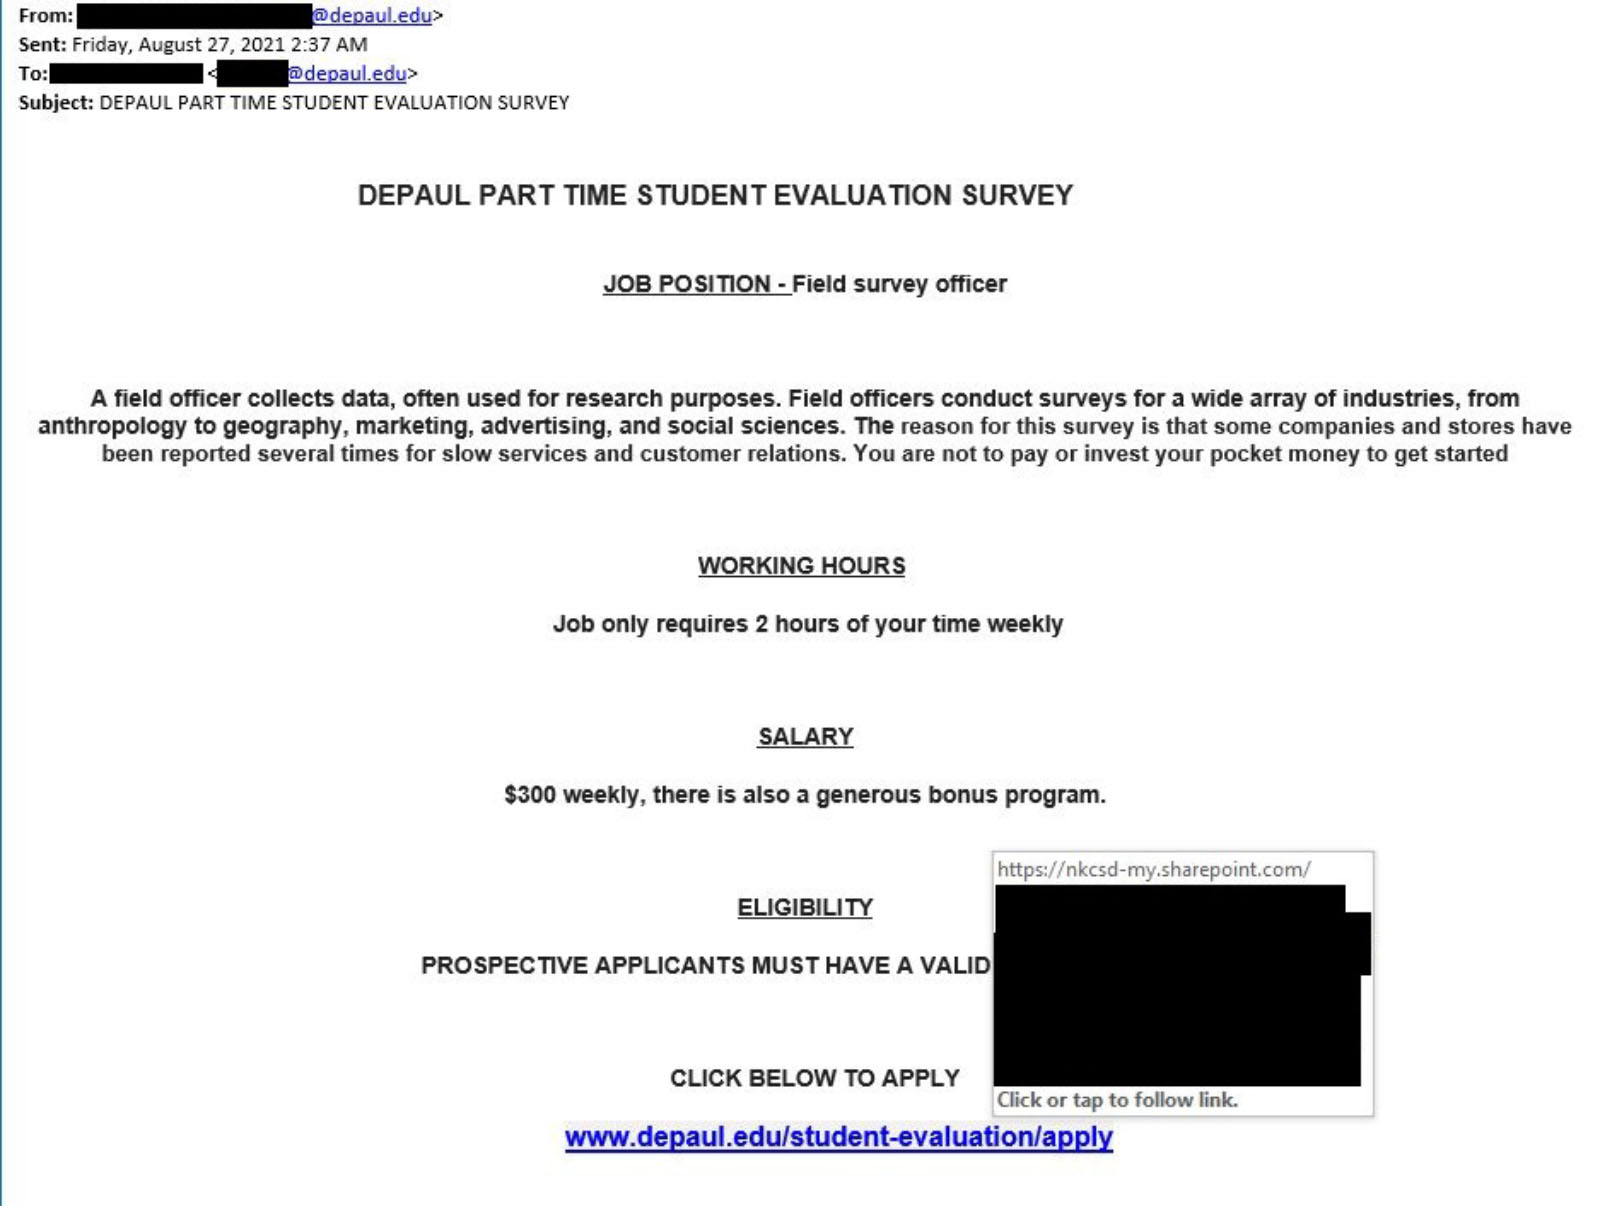 A screenshot of a malicious email purporting to offer job posting, which is fake. The email contains a malicious link.